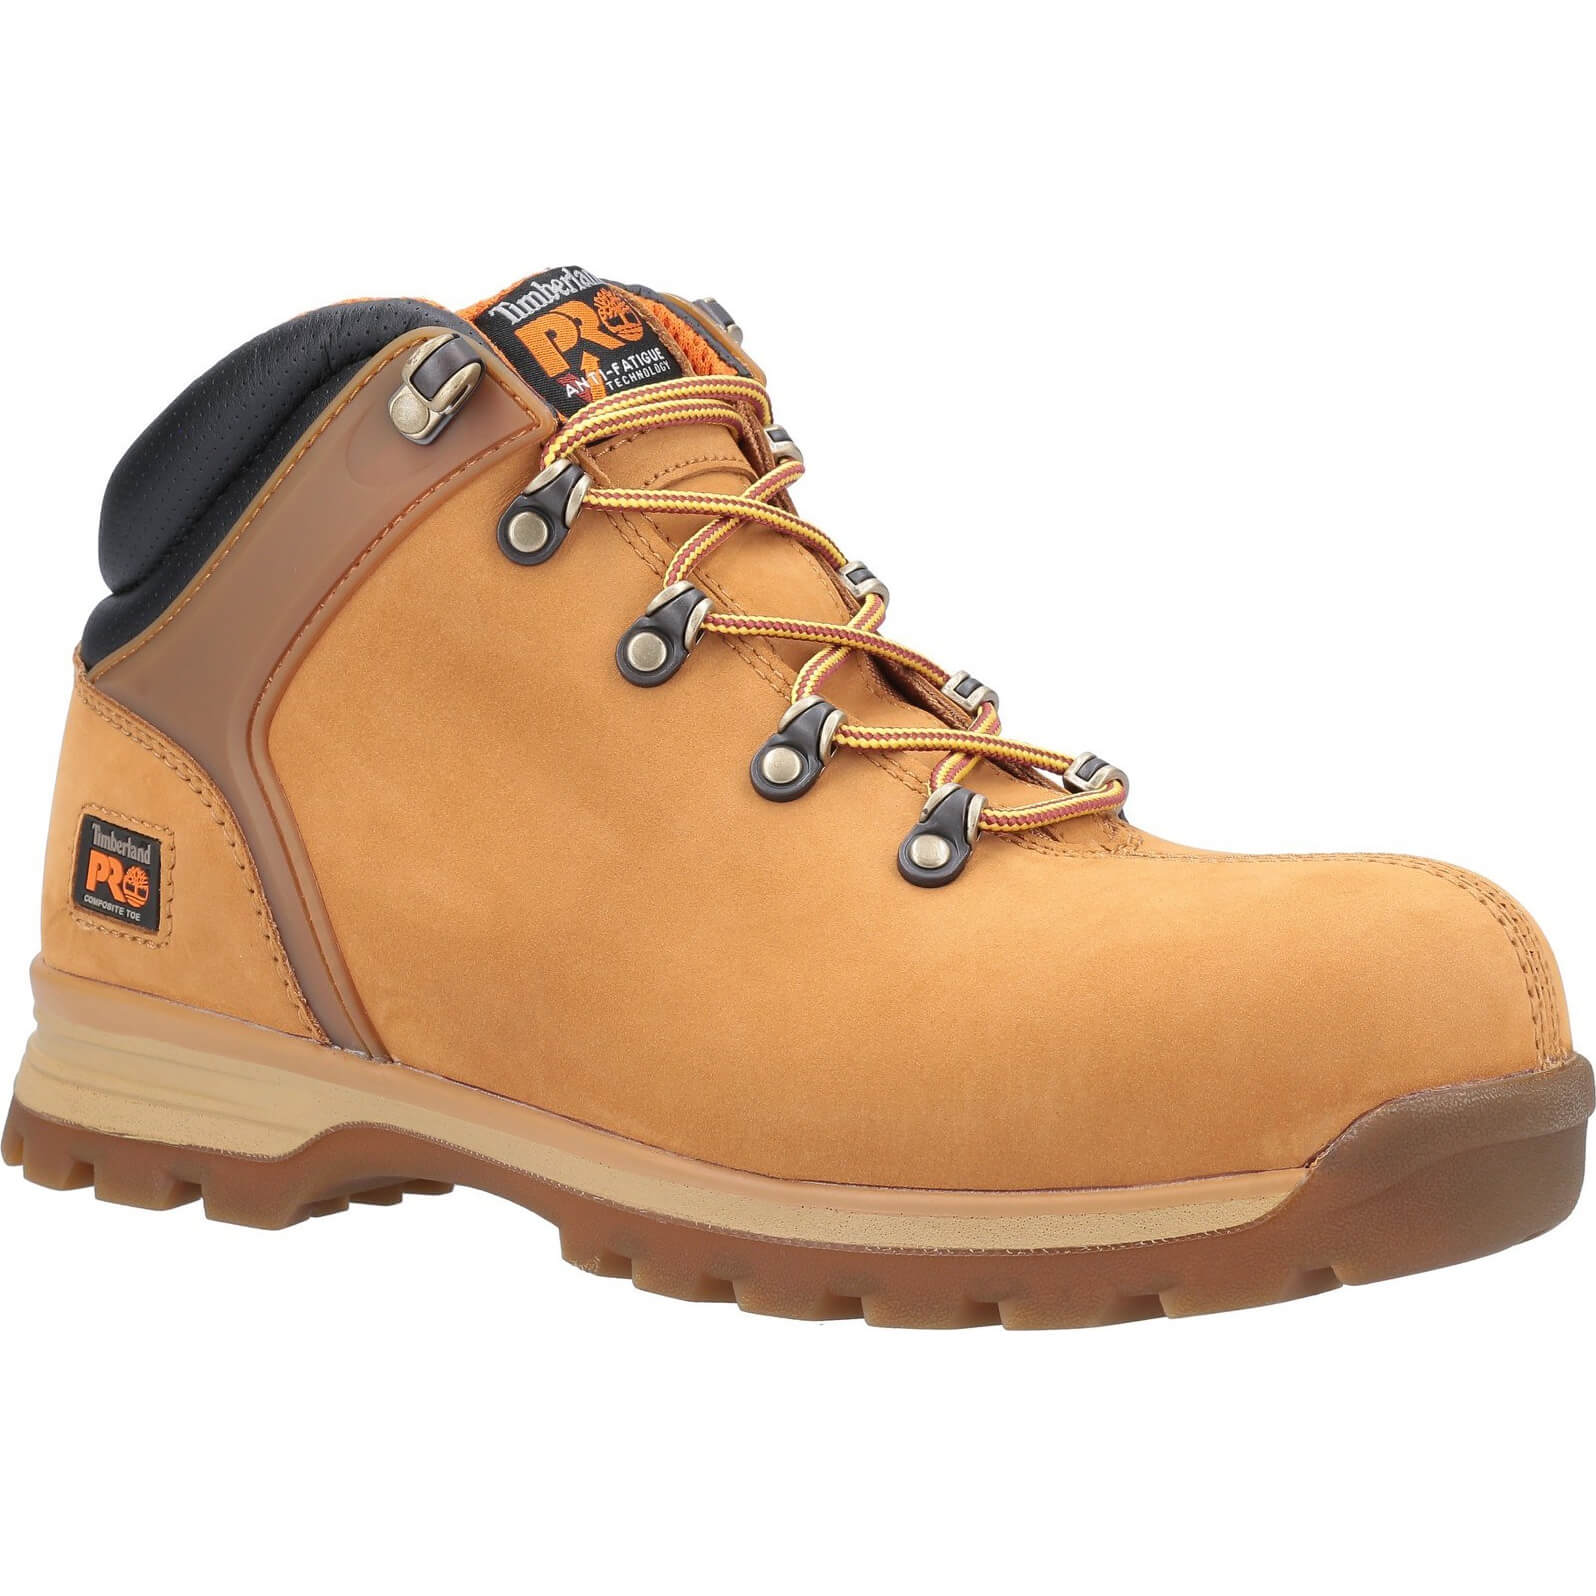 Image of Timberland Pro Splitrock XT Composite Safety Toe Work Boot Wheat Size 11